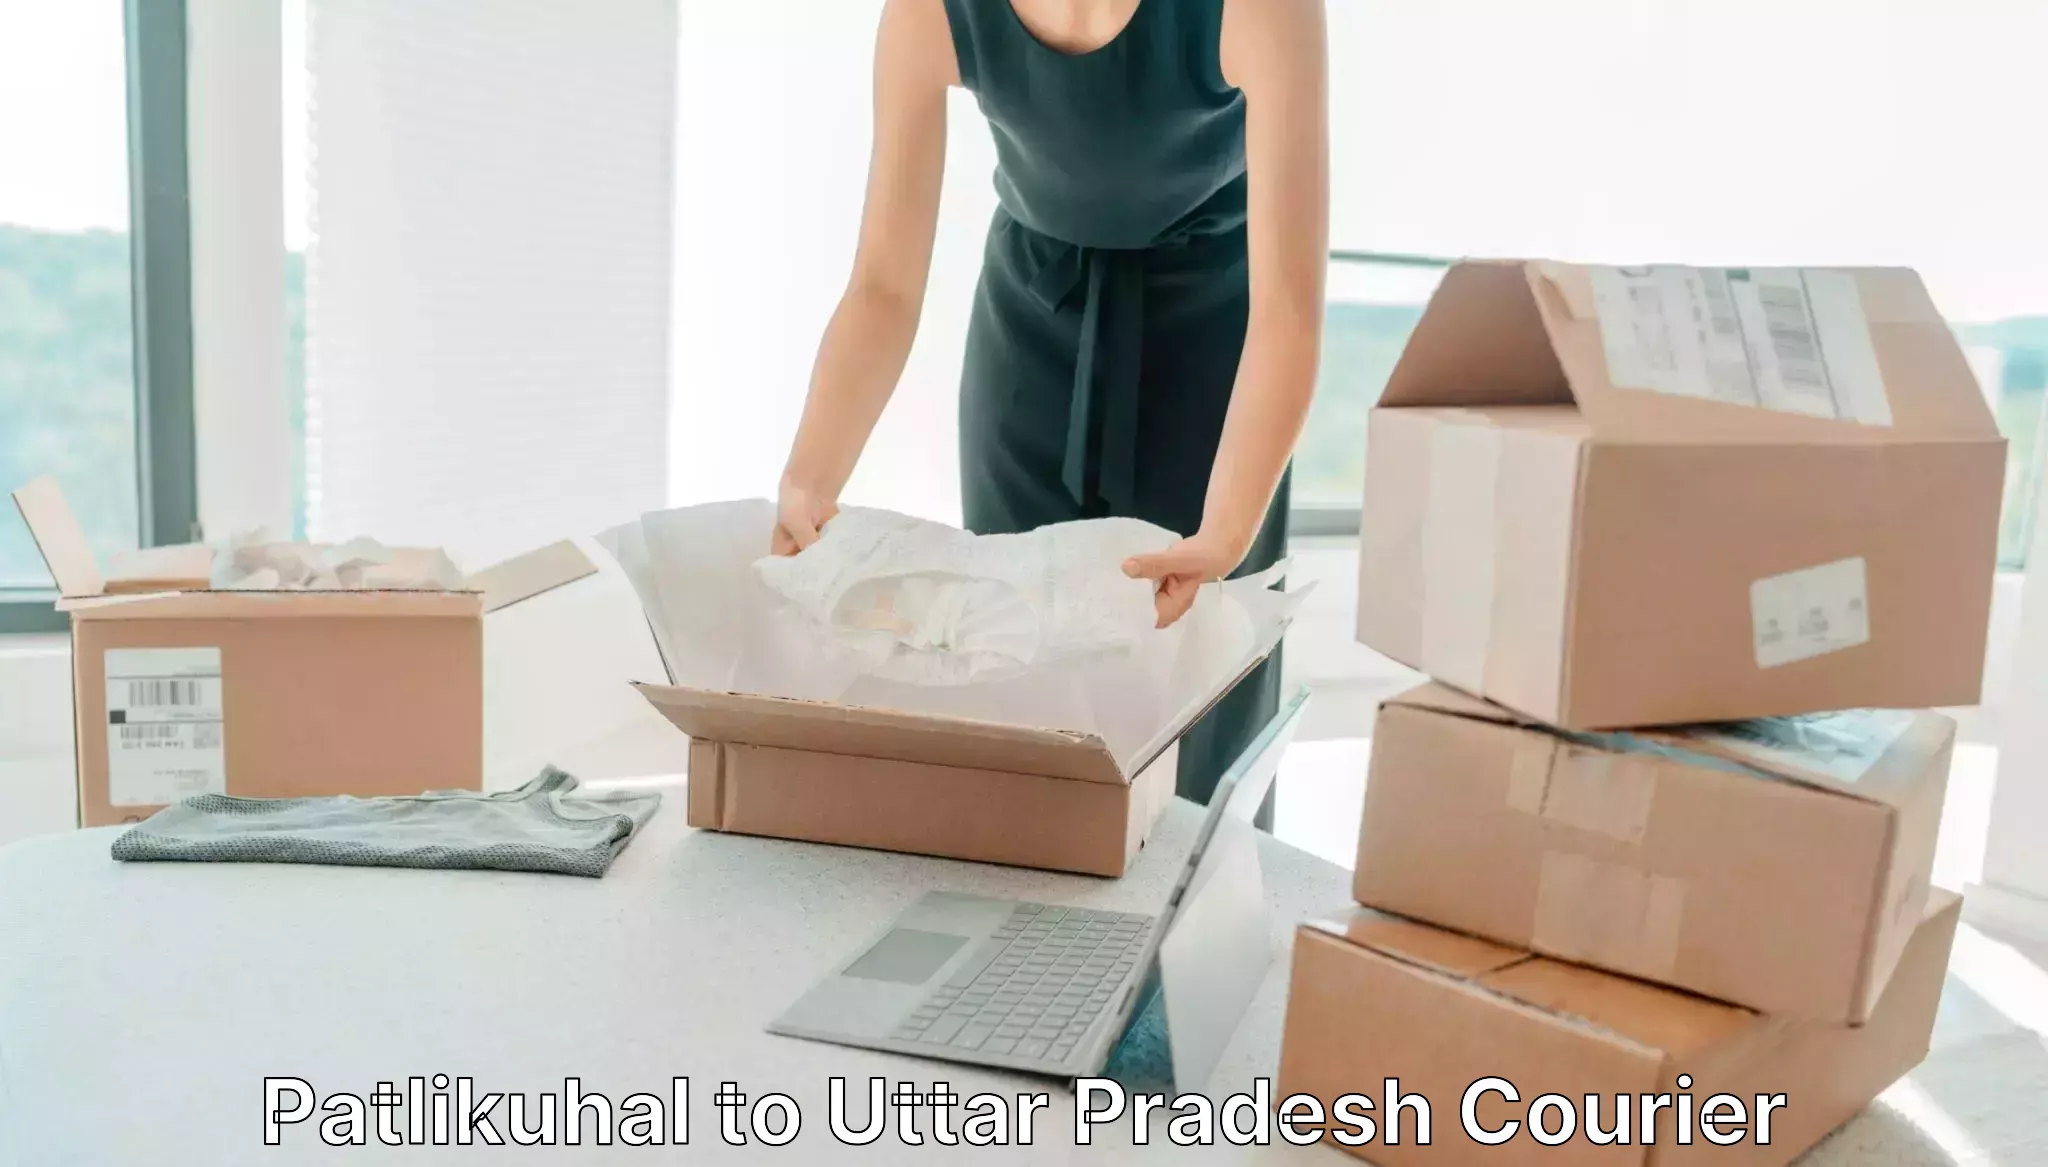 Customizable delivery plans Patlikuhal to Bareilly